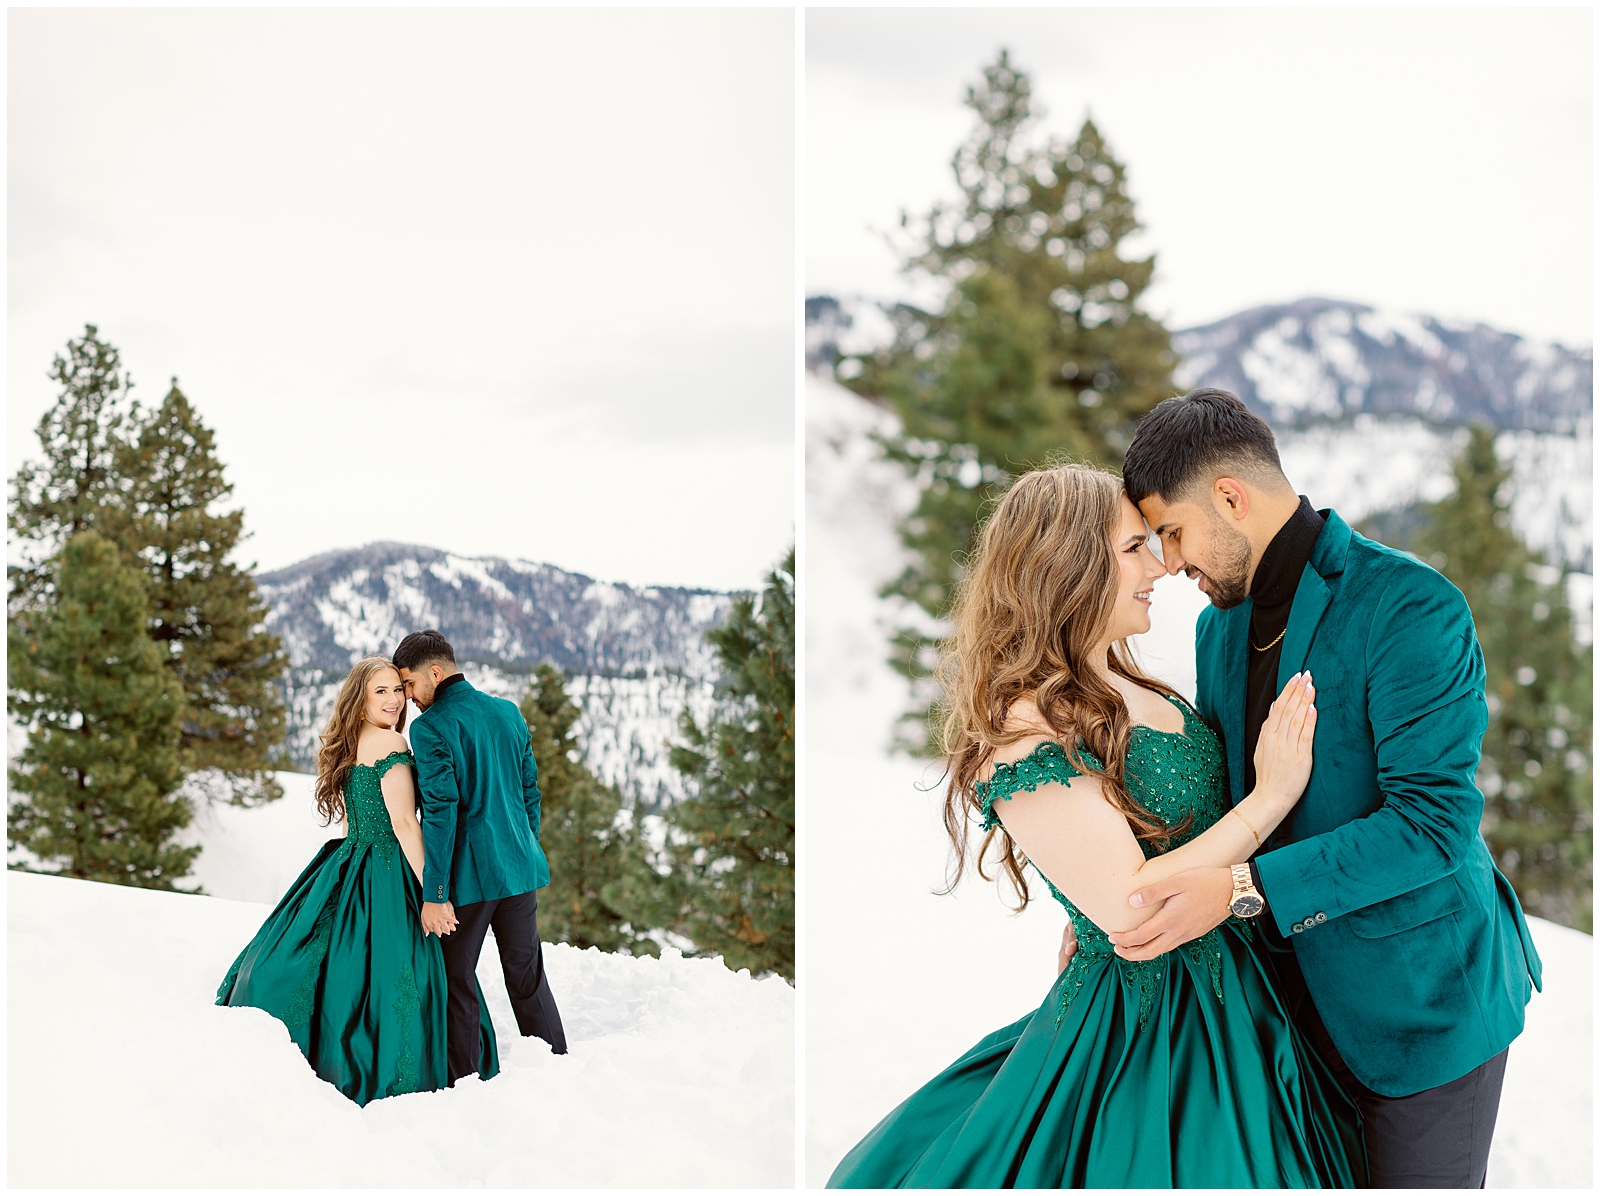 Winter Wonderland Engagement Session Classy in Green